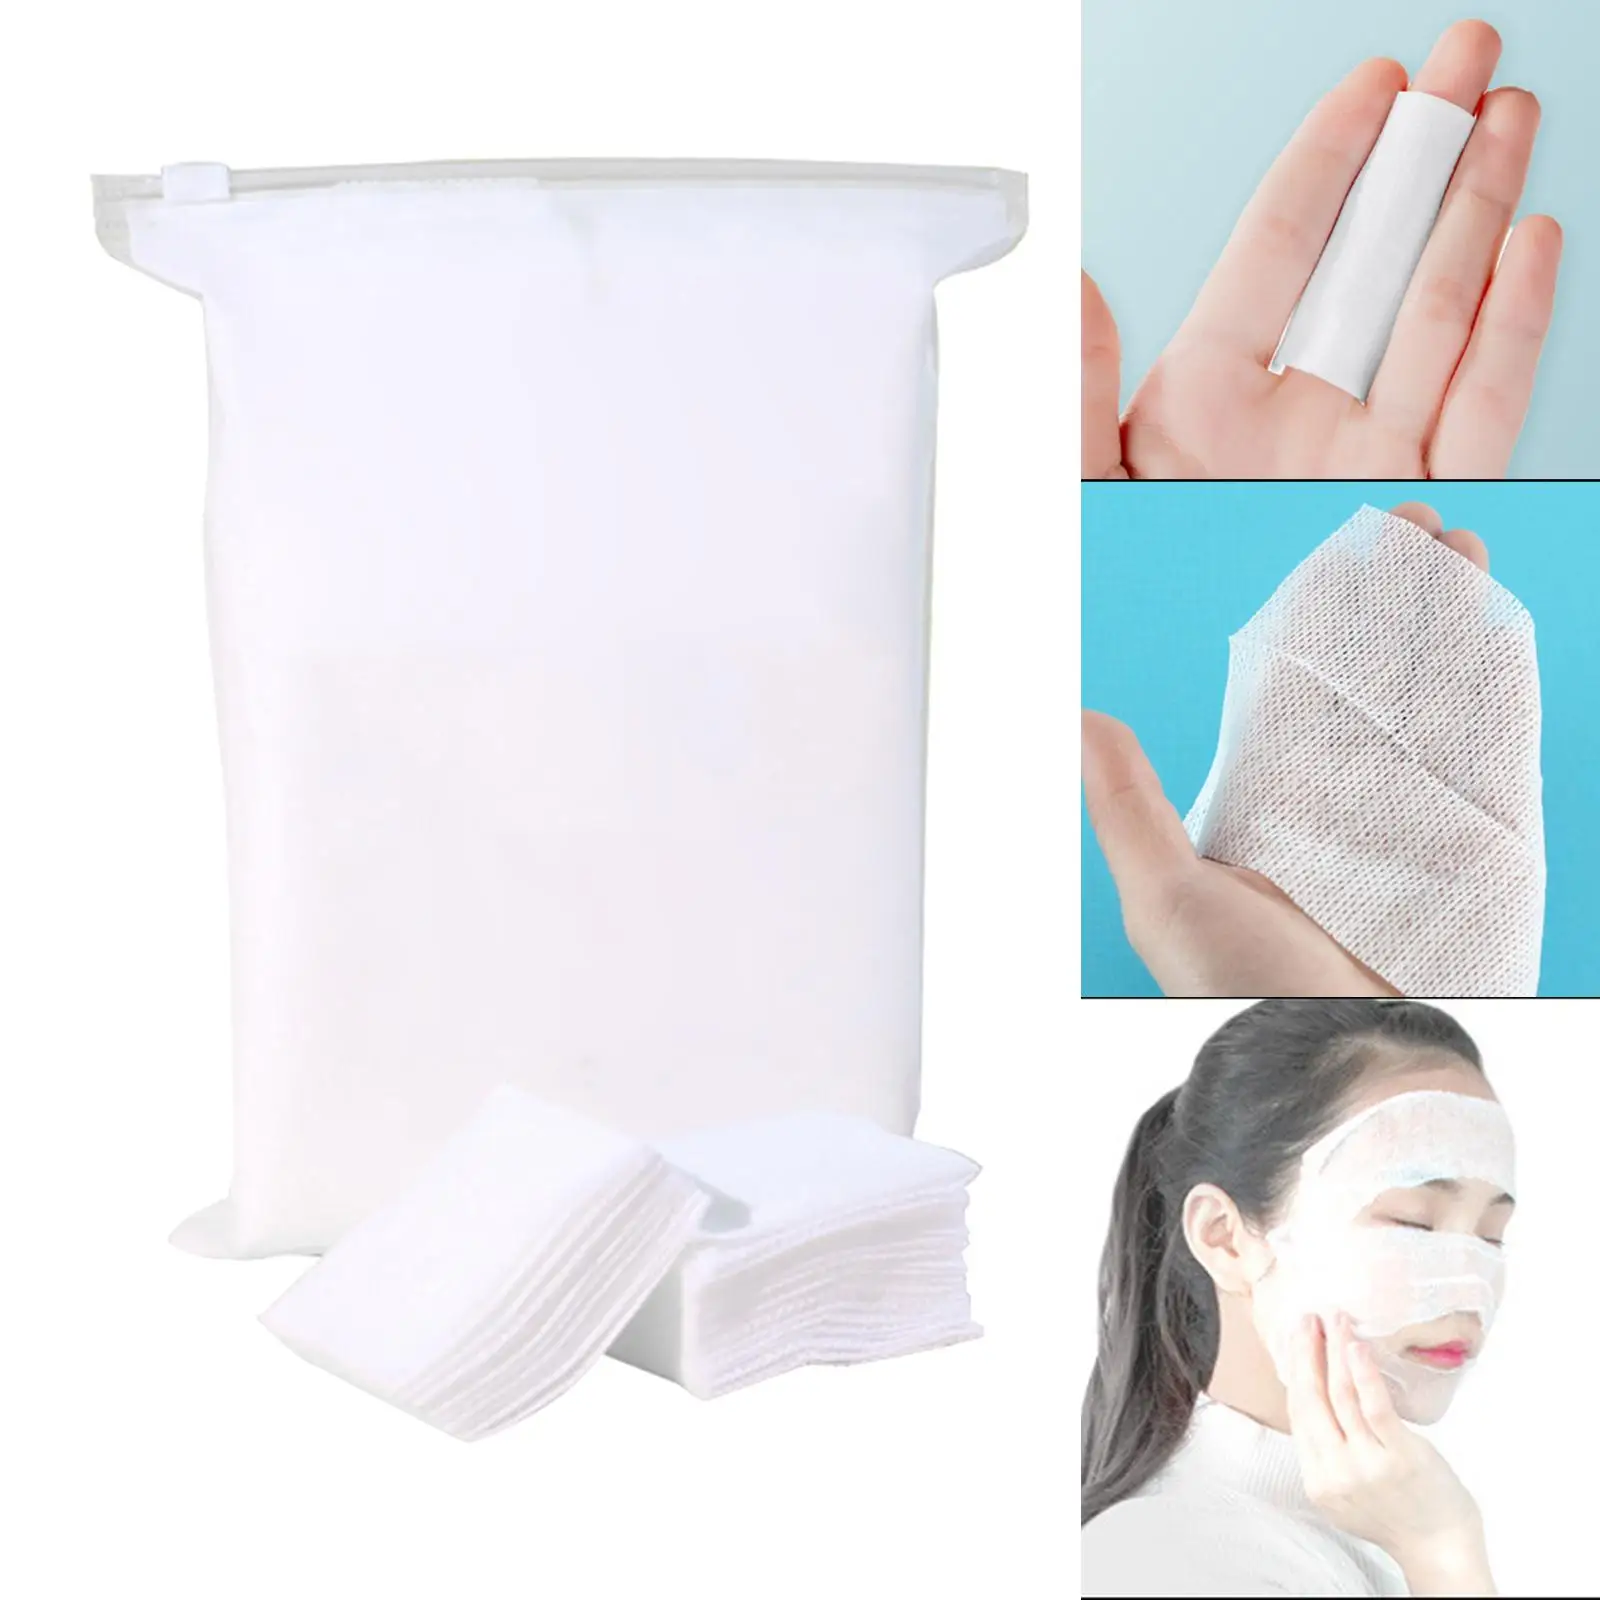 600 Pieces Stretchy Cotton Pads Disposable Breathable Unbleached Facial Cleansing Cloth for Skincare Apply Toner Eye Nails Face